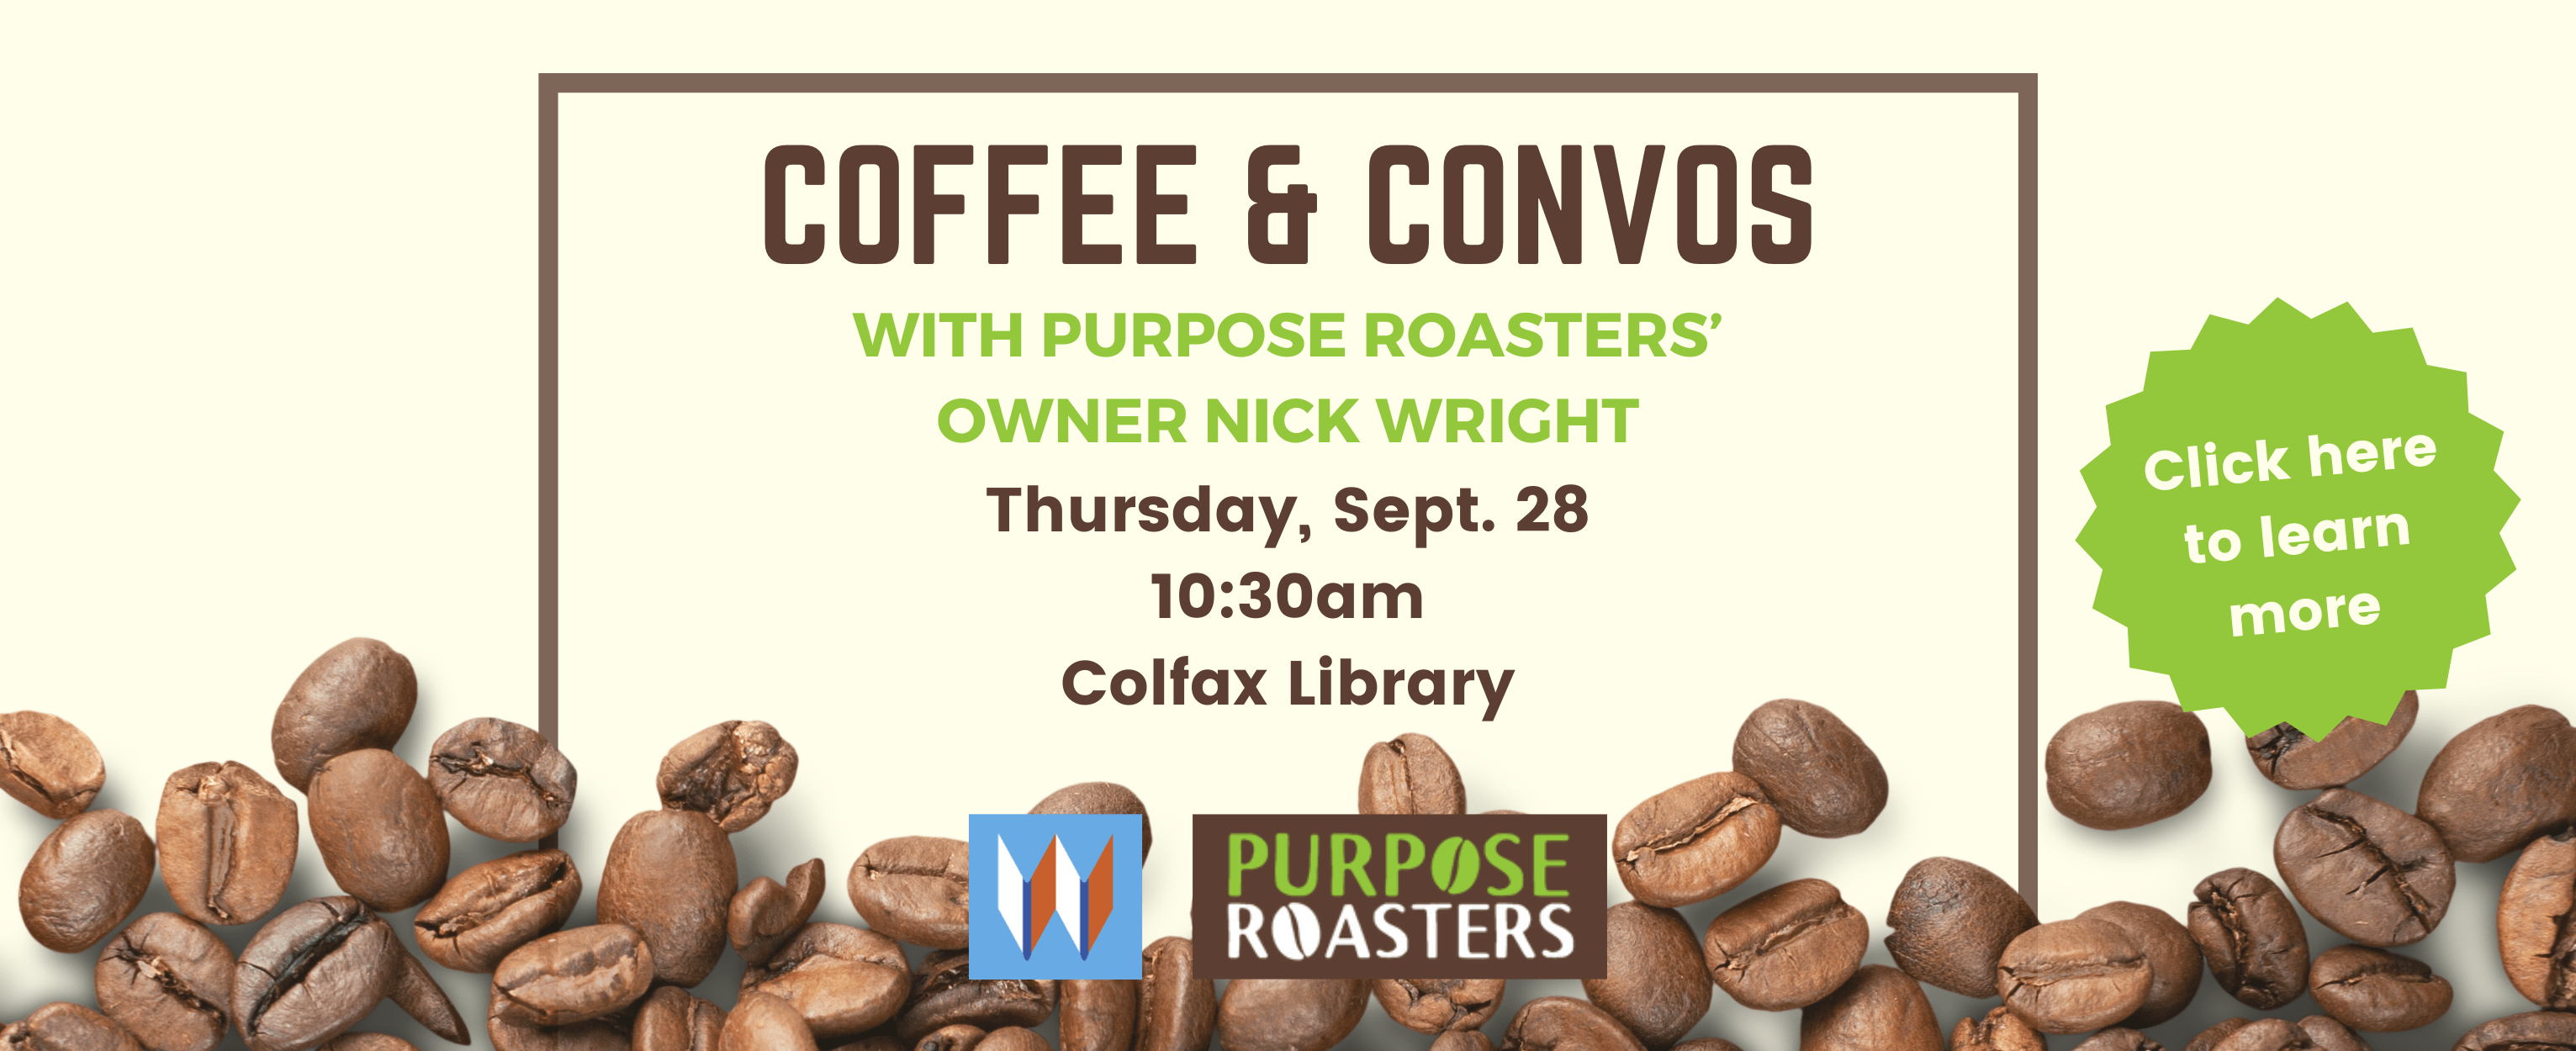 Join us and Purpose Roasters for Coffee and Convos at the Colfax Library on Thursday, Sept. 28 at 10:30 AM. Click here for more info.